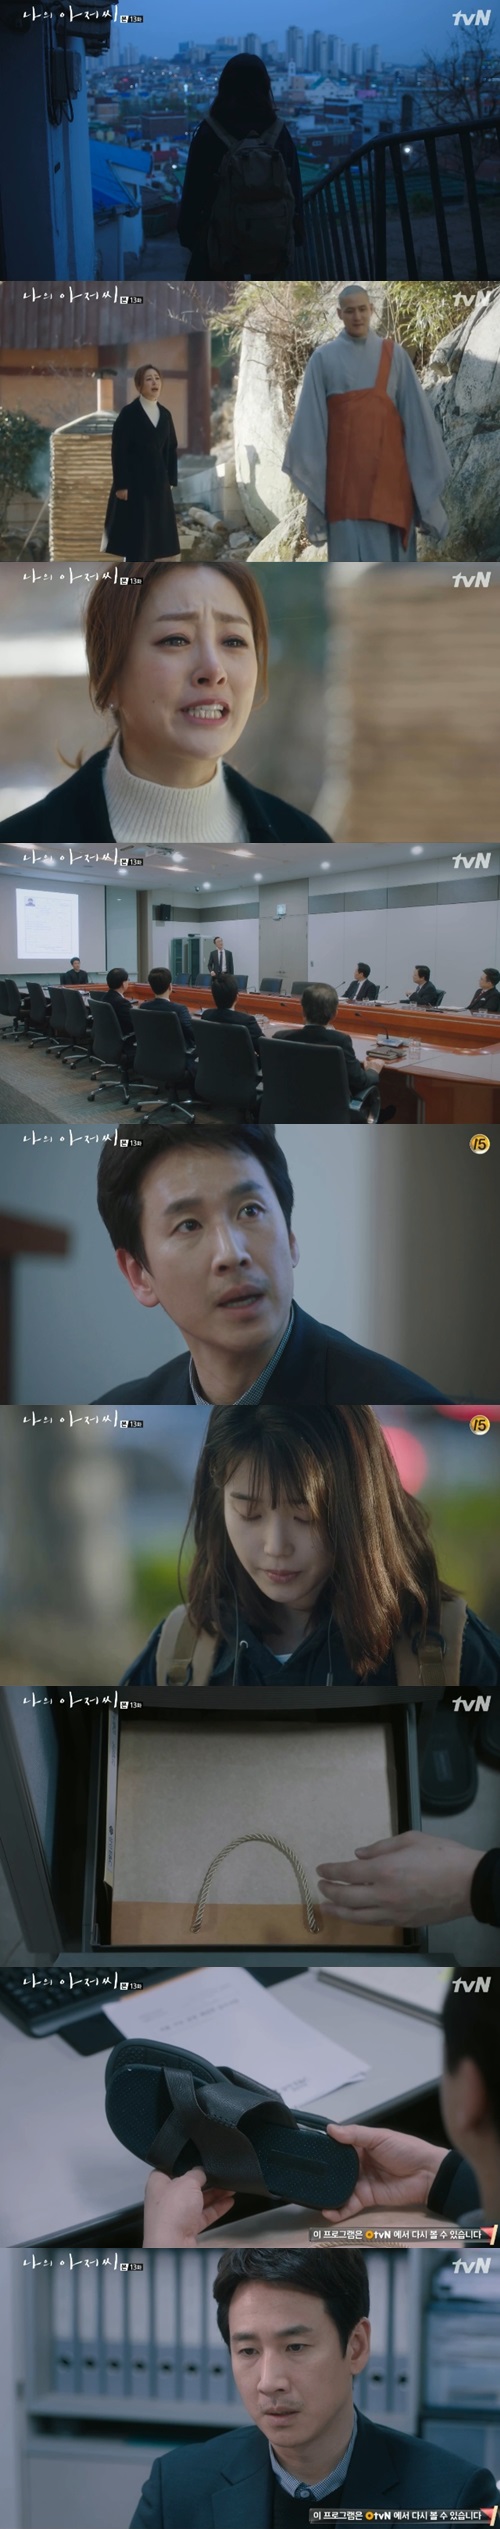 IU left Lee Sun Gyun with slipper giftIn the 13th episode of TVNs tree drama My Uncle, which aired on May 9, Lee Ji-an (IU) left a final gift to Park Dong-hoon (Lee Sun Gyun) and disappeared.Park Dong-hoon passed the Sangsangsang Danger safely thanks to Ijian, and he bought rice with gratitude and took me home.I want to hug you once to cheer up, Park Dong-hoon said, I am strong. Thank you. So when Park Dong-hoon returned, Do Joon-young (Kim Young-min) was waiting and hit Lee Ji-ans slap.Do Jun-young said, Do you think you helped Park Dong-hoon.You cut Park Dong Woon (Jung Hae-gyun) and you put Park Dong-hoon in the spot.How do you know you were playing with Park Dong-hoon? Youre the one who caught my affair weakness and blackmail – Cinémix Par Chloé.Blackmail – Cinémix Par Chloé, but Ijian pulled out a voice file that Do Jun-young ordered to seduce Park Dong-hoon, saying, If you are laughing, you will be all over it.Do Joon-young gave up Blackmail – Cinémix Par Chloé when Ijian had my weakness, but soon Ijian had a new Danger.Park Dong Woon succeeded in tracking Lee Ji-an Friend Song Ki-bum (played by Ahn Seung-gyun), who fed himself alcohol and took him to Sokcho.Lee Ji-an, who found out about Park Dong-hoon while listening to him, immediately informed Song Ki-bum of the situation and said, Lets go together today.Meanwhile, Park Ki-hoon (Song Dawn) delivered a side dish made by his mother, Byun Yo-soon (Go Doo-shim), to Park Dong-hoons house, and saw his brother-in-law Kang Yoon-hee (Lee Ji-ah) replacing the door.Park Ki-hoon, who recognized that the trace left on the door was exactly the mark of Park Dong-hoons head and punched, said, Why did you fight?I asked if he had an affair with his sister-in-law. When Kang Yoon-hee was silent, Park Ki-hoon noticed the affair.Kang Yoon-hee informed Park Dong-hoon of the situation, and Park Dong-hoon visited the brothers cleaning fire.Park said, Tell me his name before I find out about his stupid brother. Park Dong-hoon punched his brother.Park Dong-hoon (Park Ho-san) said, My eldest son has been suffering from a lot of trouble. He called Kang Yoon-hee directly and apologized, I am really sorry.In addition to Park Dong Woon, Do Joon-young was also eager to catch Lee Ji-an Friend Song Ki-bum, and Song Ki-bum was chased and called Lee Ji-an to get caught.Ijian hesitated and sent Park Dong-hoon a text saying, Do good interview tomorrow, and Park Dong-hoons Thank you tears.Before dawn the next morning, Ijian left with a large backpack.In the meantime, Jung-hee (Onara) visited the temple where his old lover, Hoon-deok (Park Hae-jun), and said, I am sick all over my body these days. You do not even benefit here.I can live with a fucking woman like me, and I love goats and grass, and I dont love them, so come down before I can burn them.Yoo Gyeong-sang